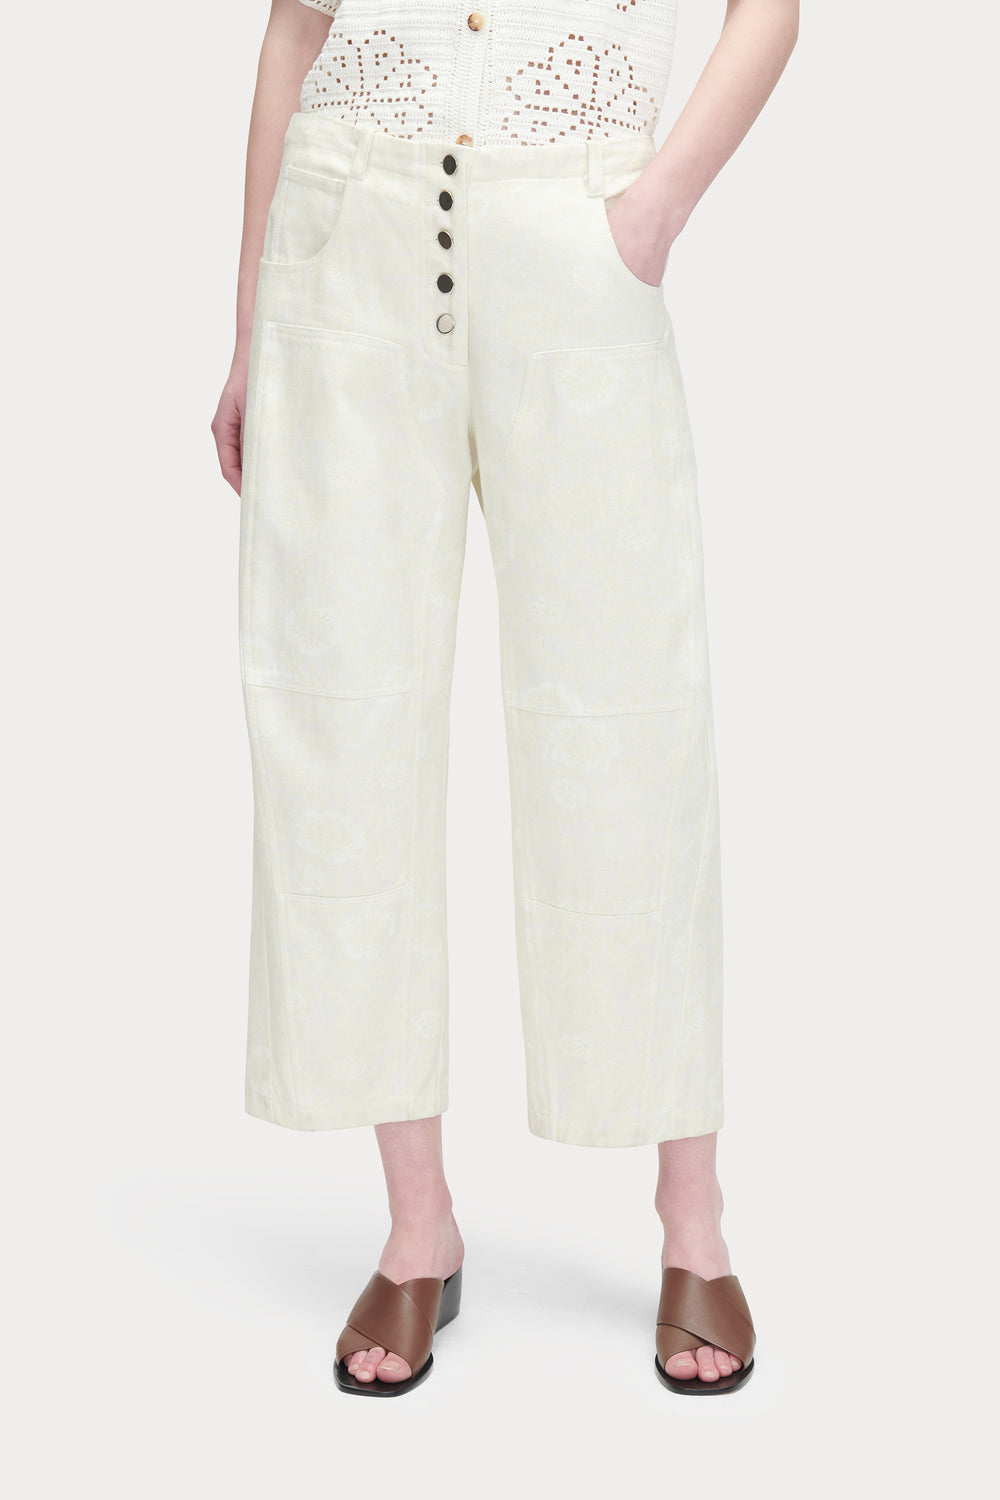 Handy Pant in White Floral Denim